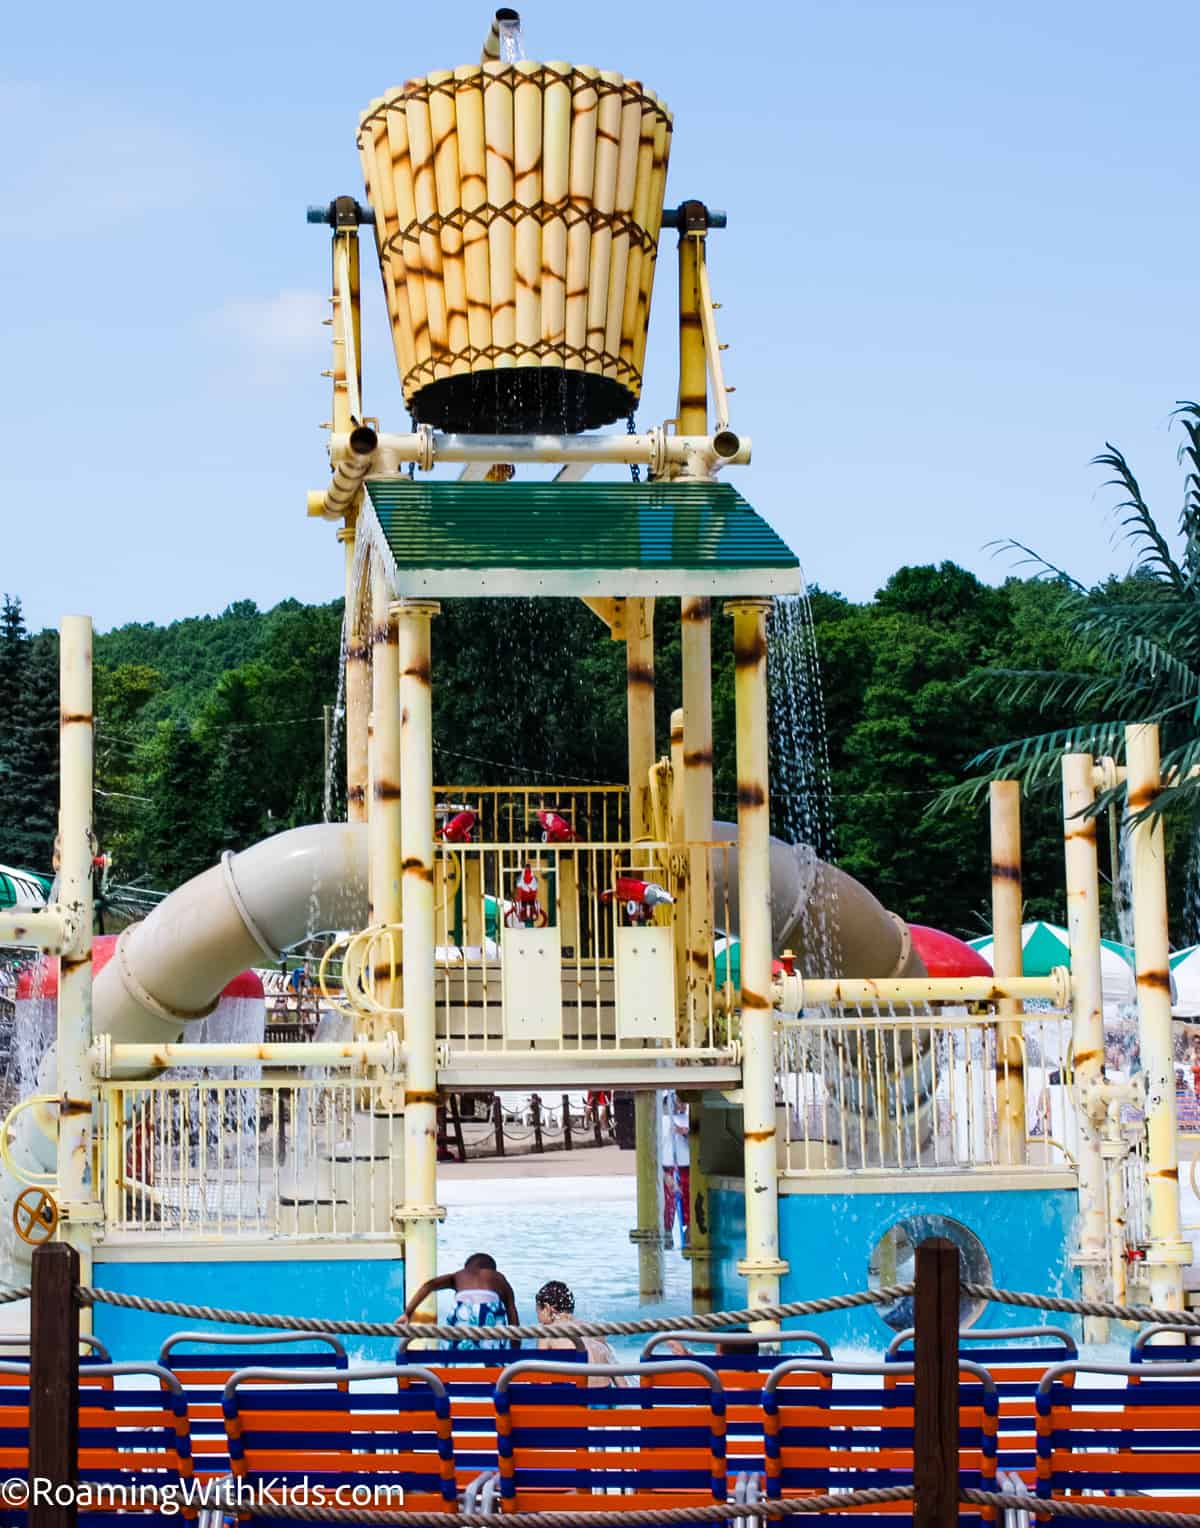 Camelbeach - Tannersville, PA - Been There Done That with Kids